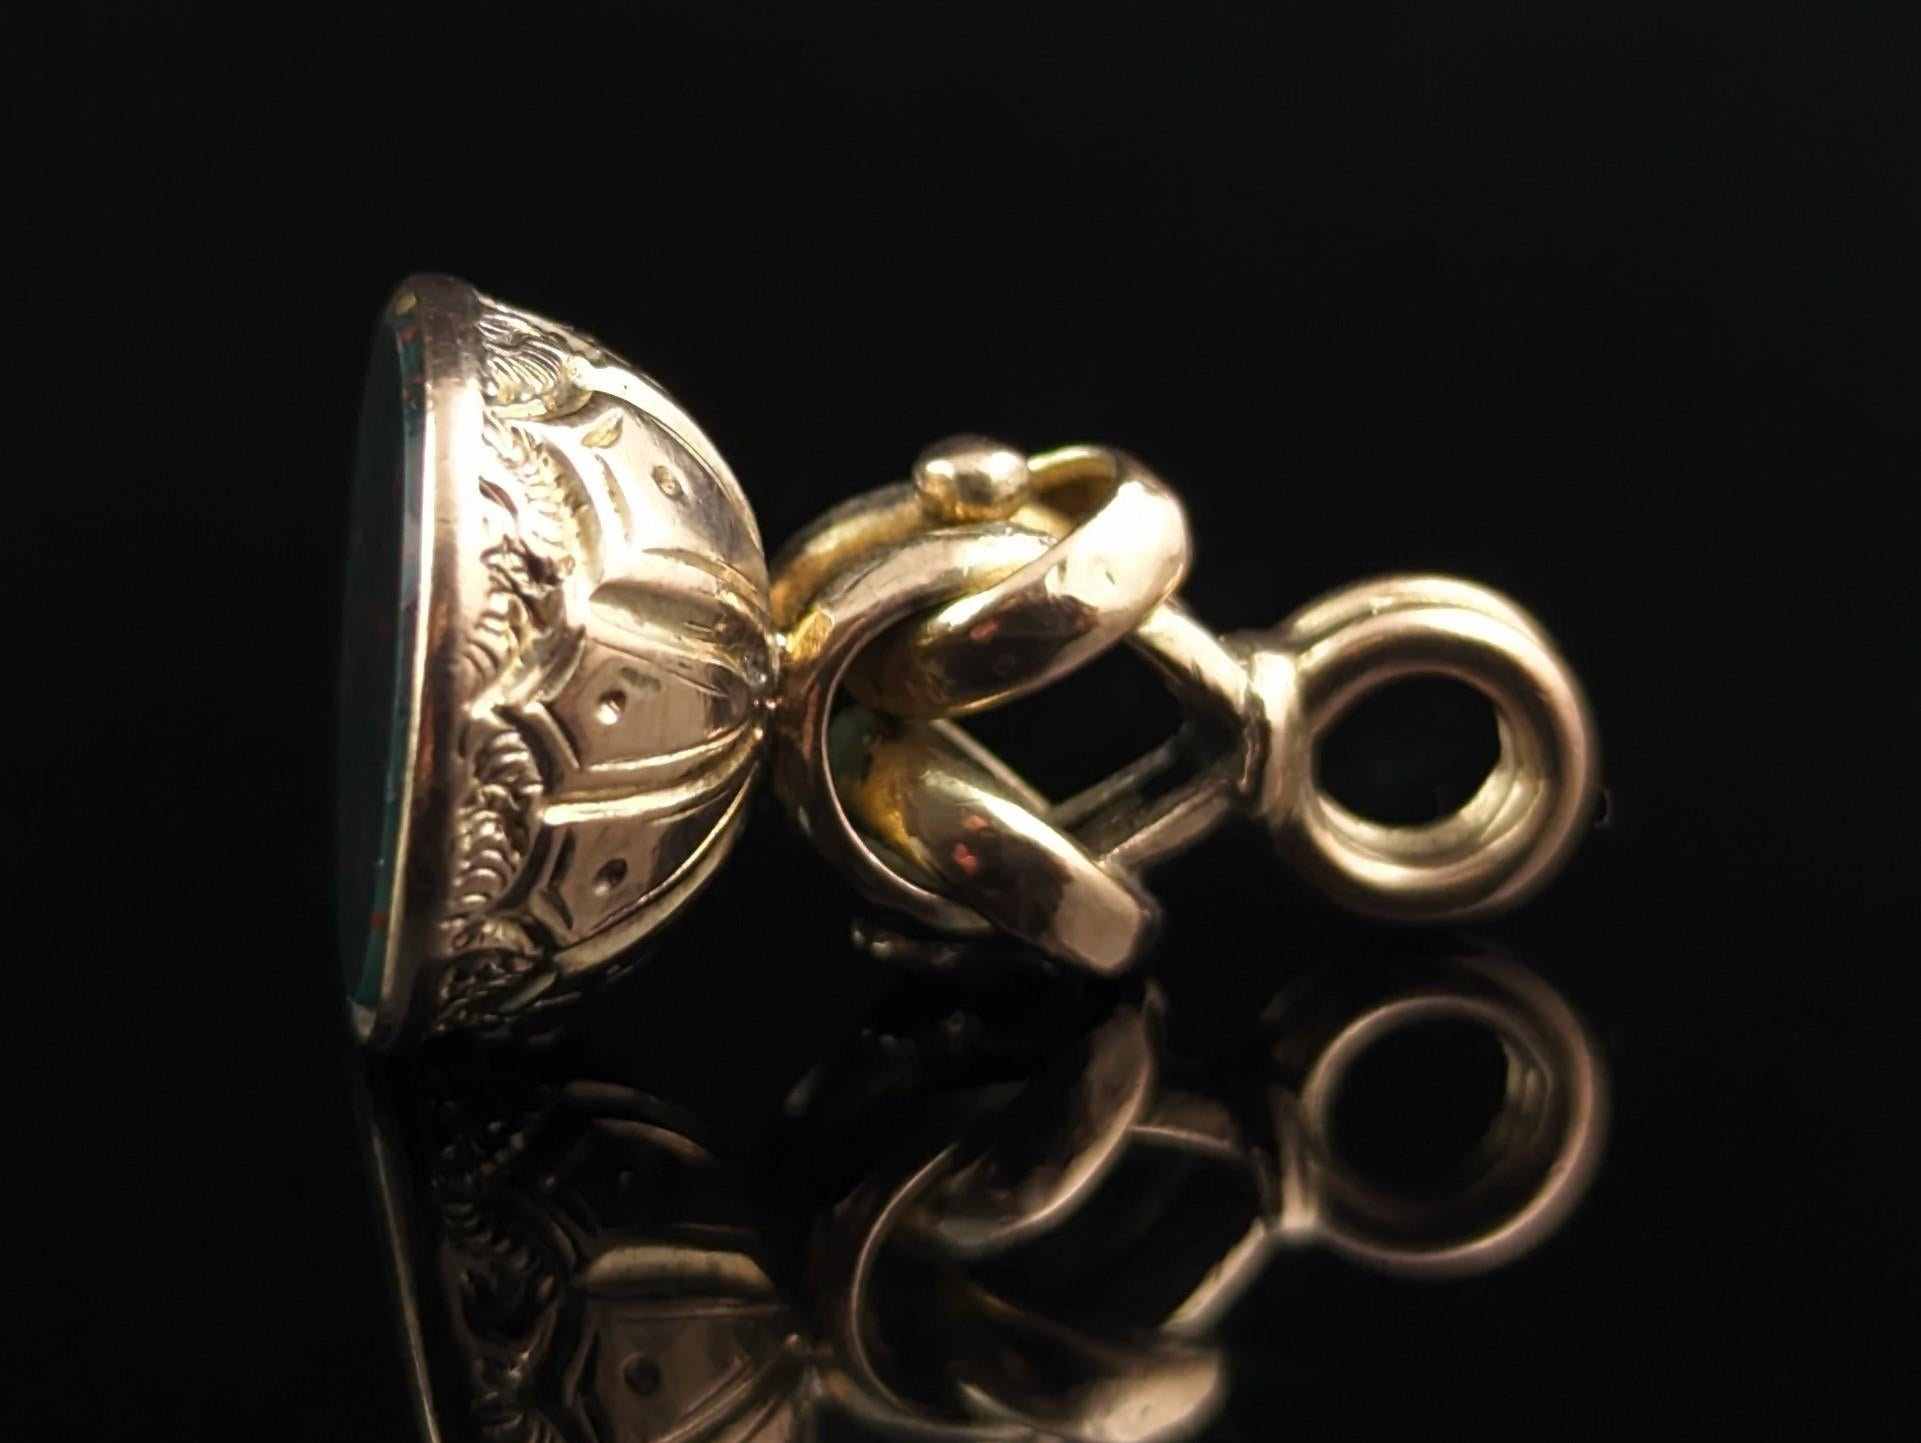 A gorgeous antique Victorian era seal fob.

These are such charming and versatile pieces of antique jewellery, the perfect example of functional beauty.

It is a nice unusual knot design almost like a lovers knot with a typical engraved domed base